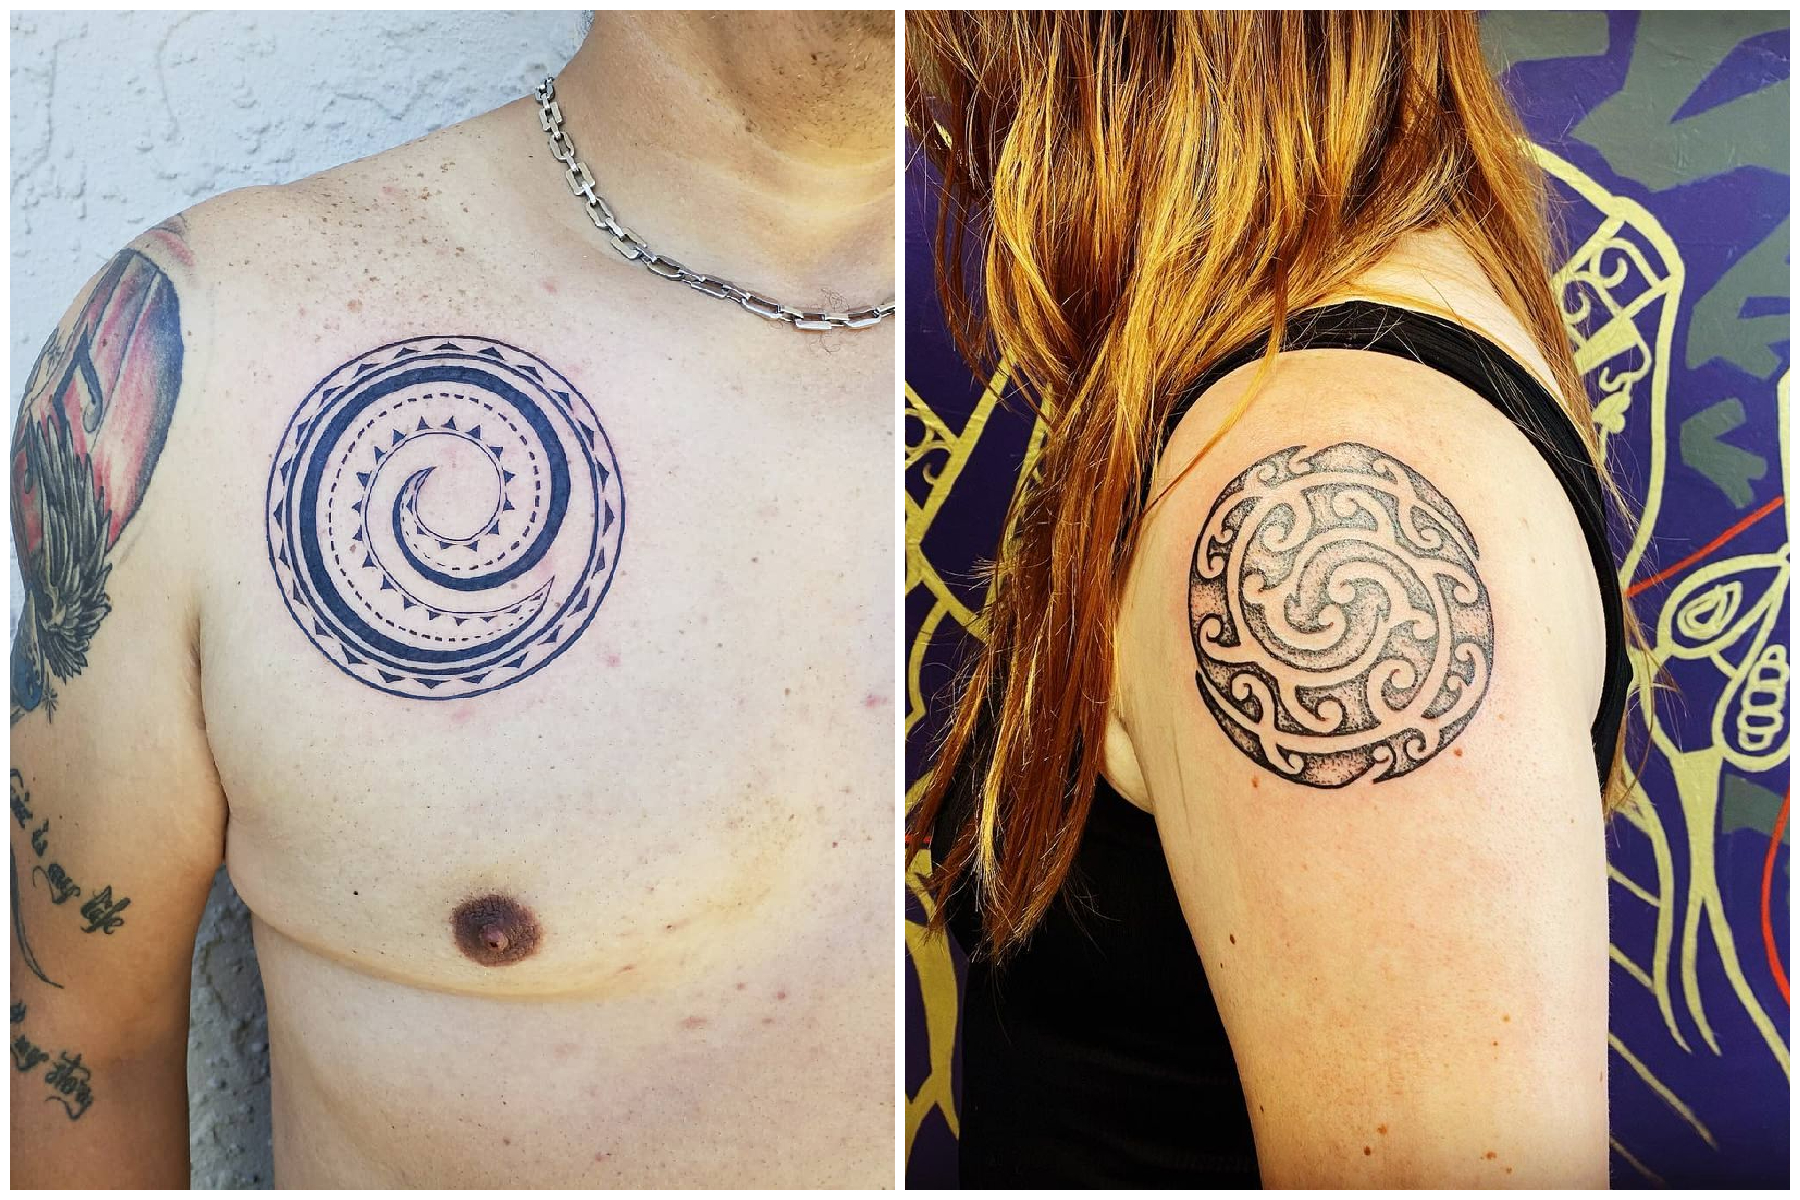 Tattoos to Celebrate Lifes Journeys Growth Change and New Beginnings   Self Tattoo